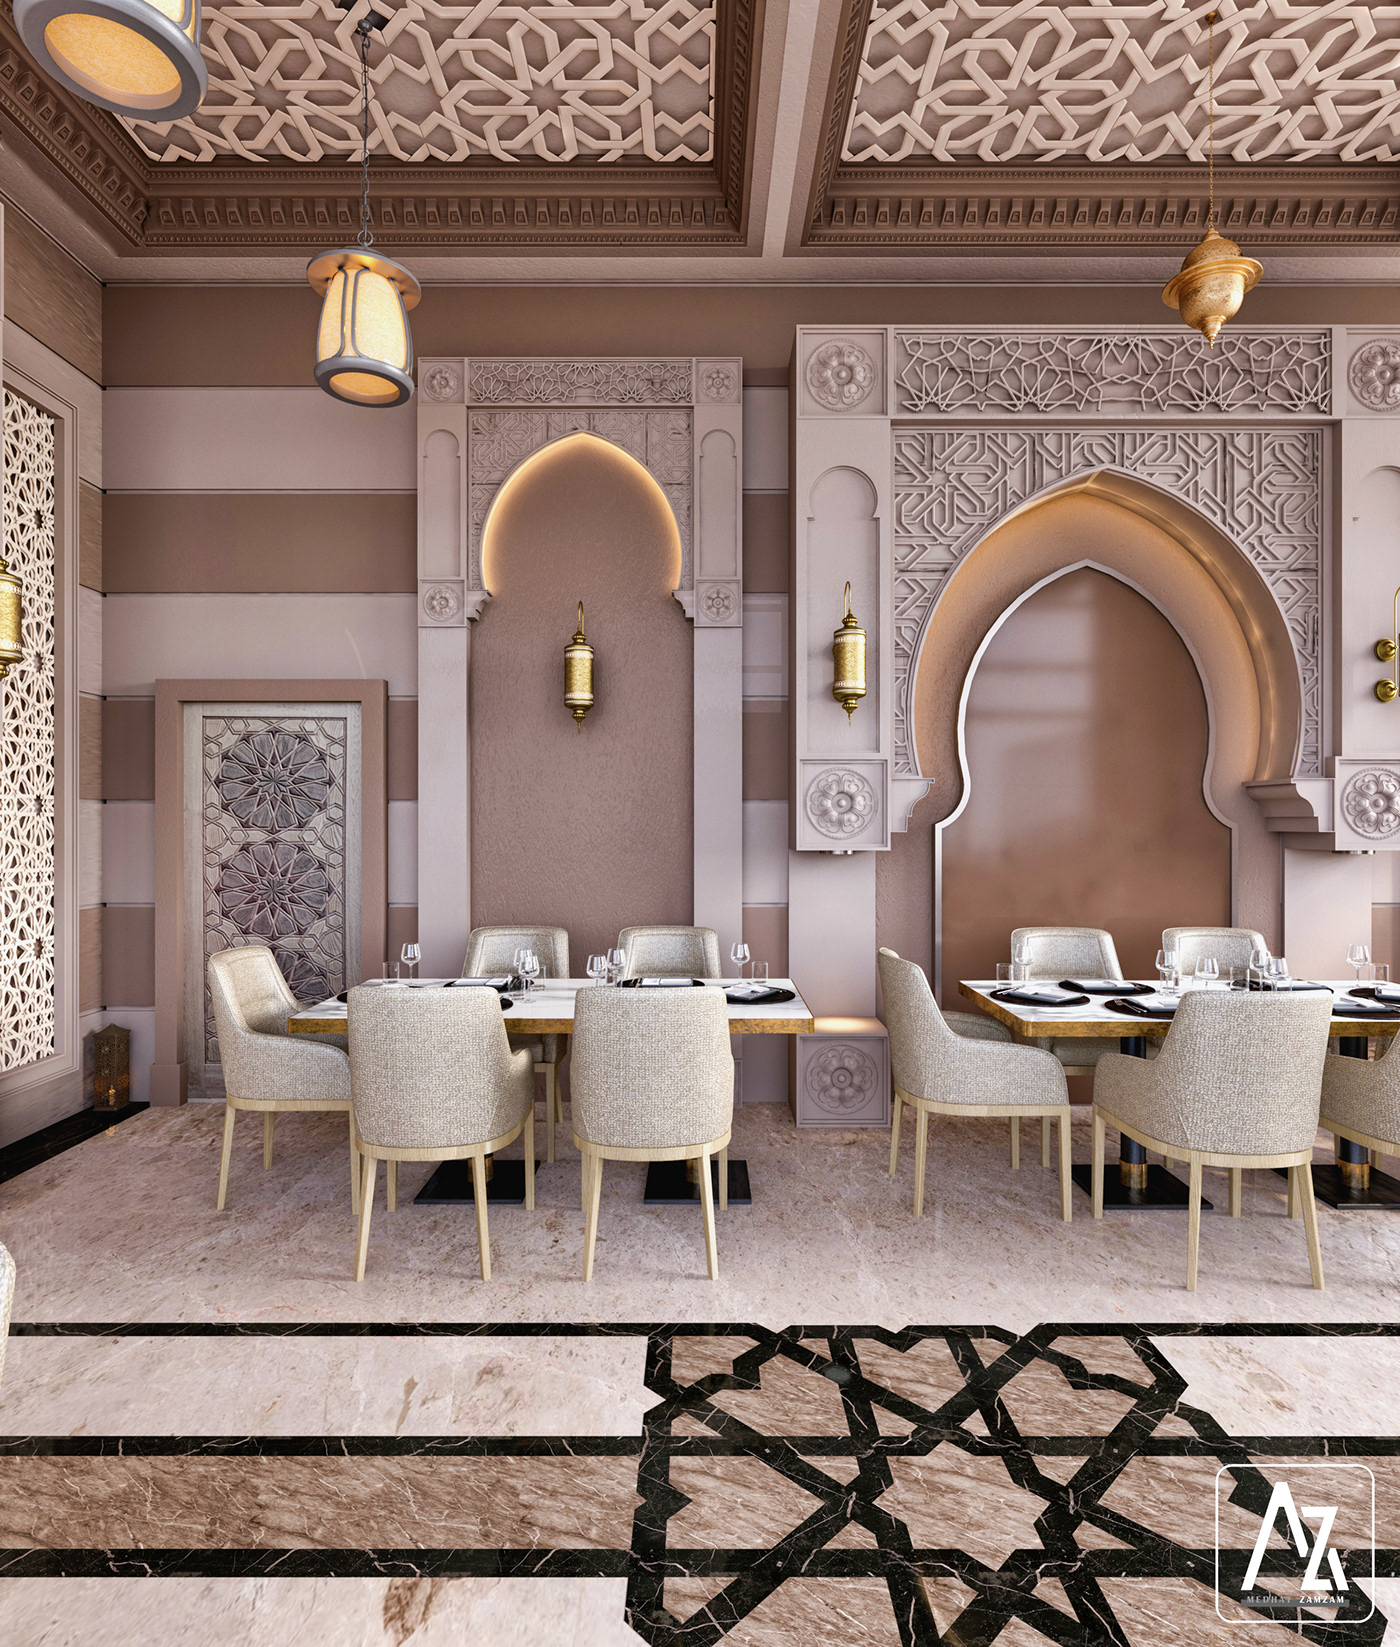 Andalusian arch arches Classic islamic ornaments restaurant vray